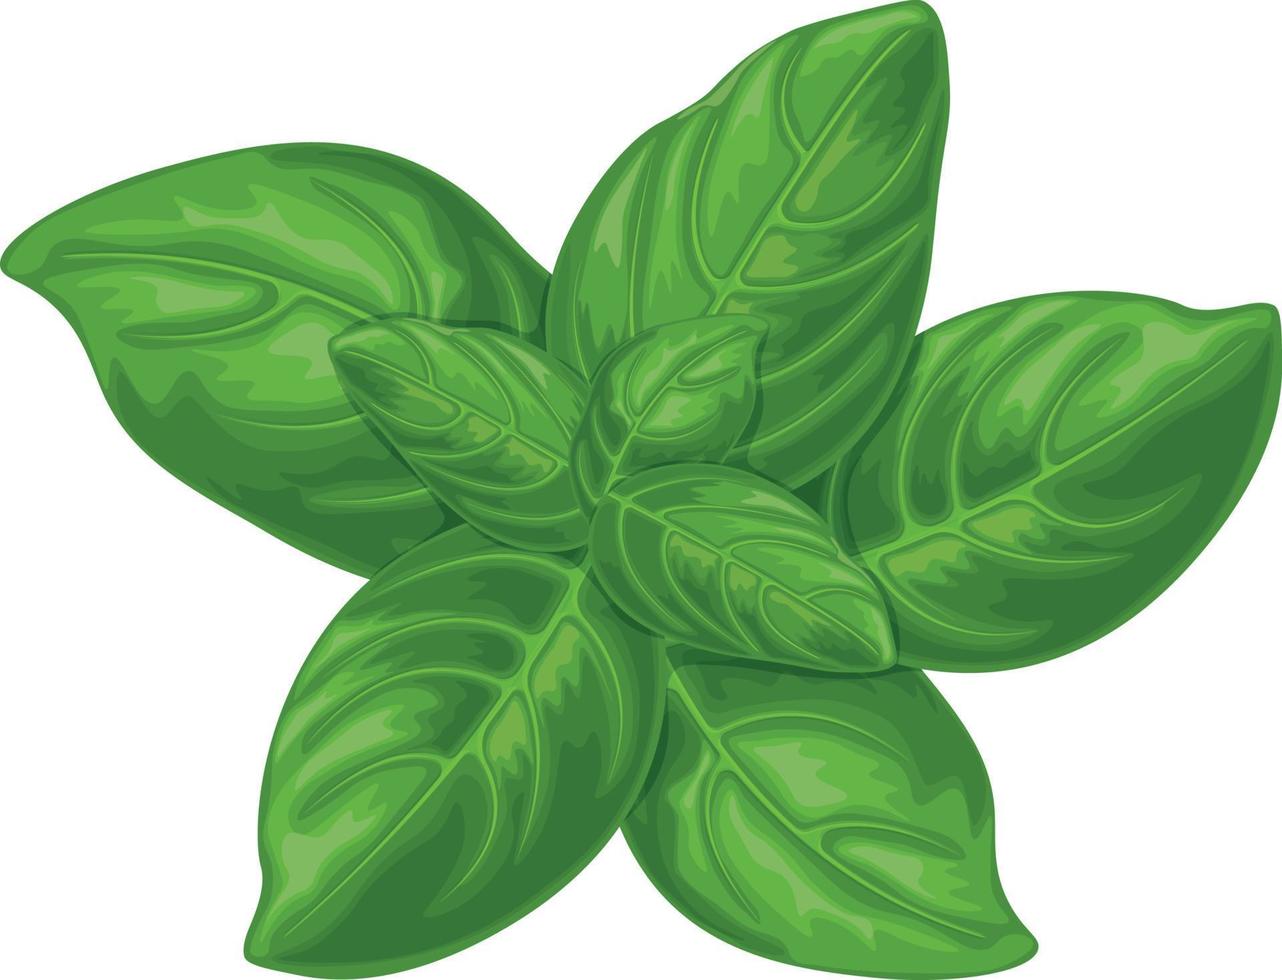 Basil. Green basil leaves. A fragrant plant for seasoning. Vector illustration isolated on a white background